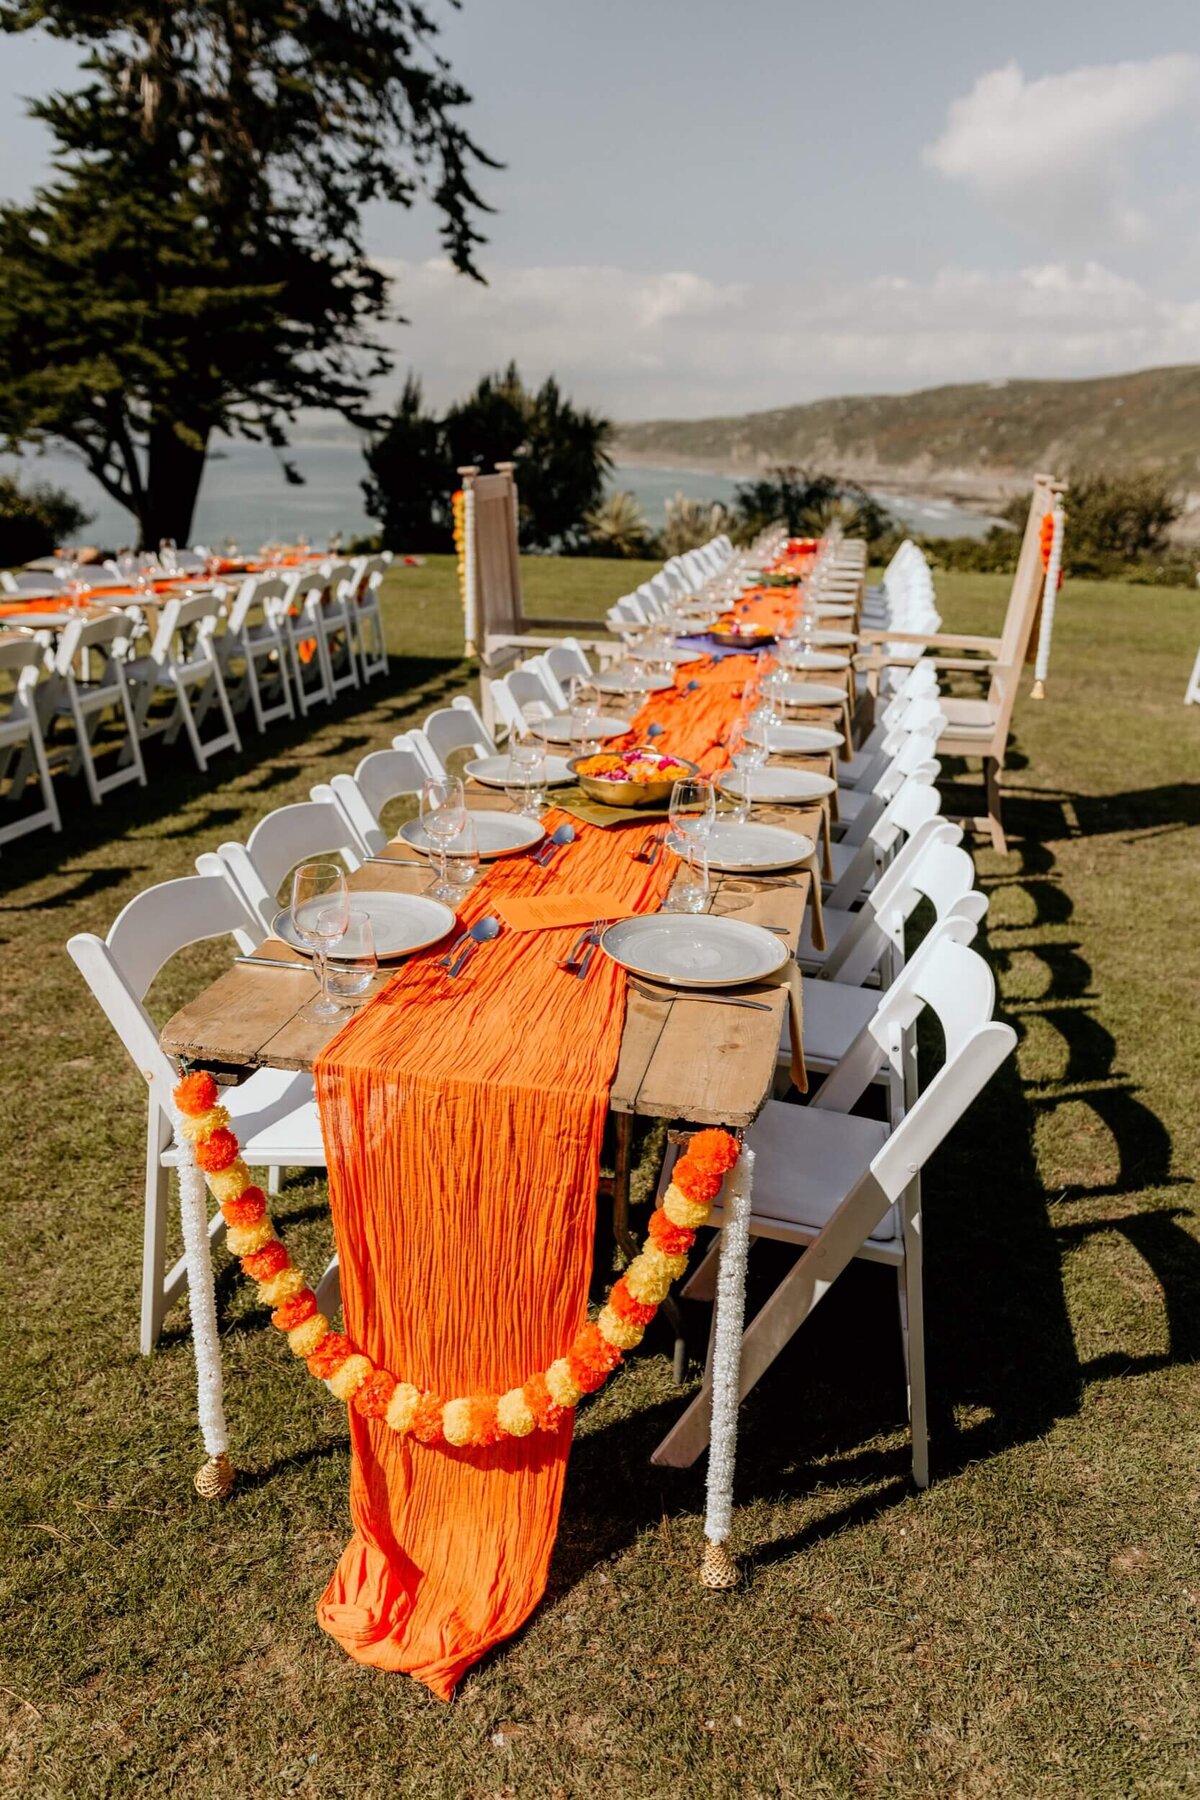 A long table set up with orange and white decorations